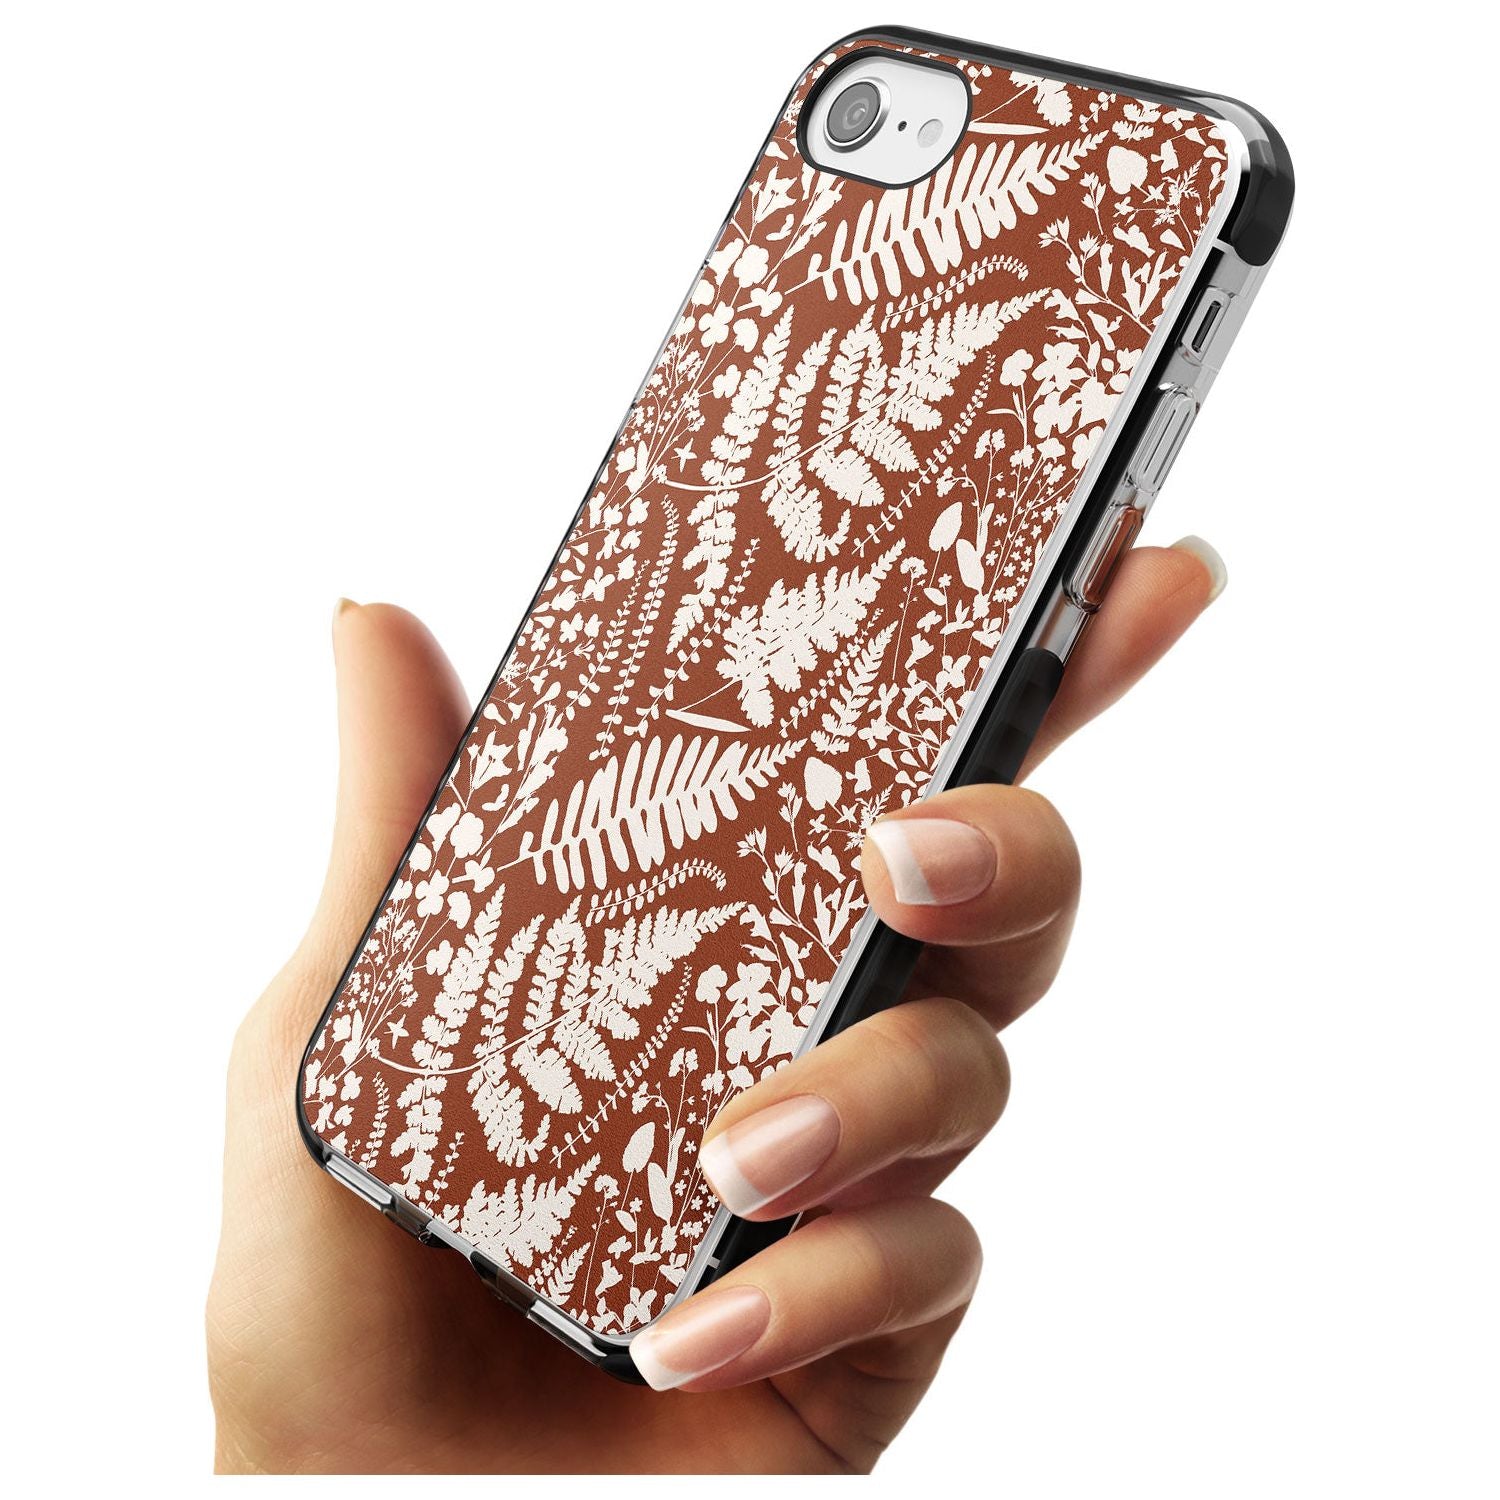 Wildflowers and Ferns on Terracotta Black Impact Phone Case for iPhone SE 8 7 Plus